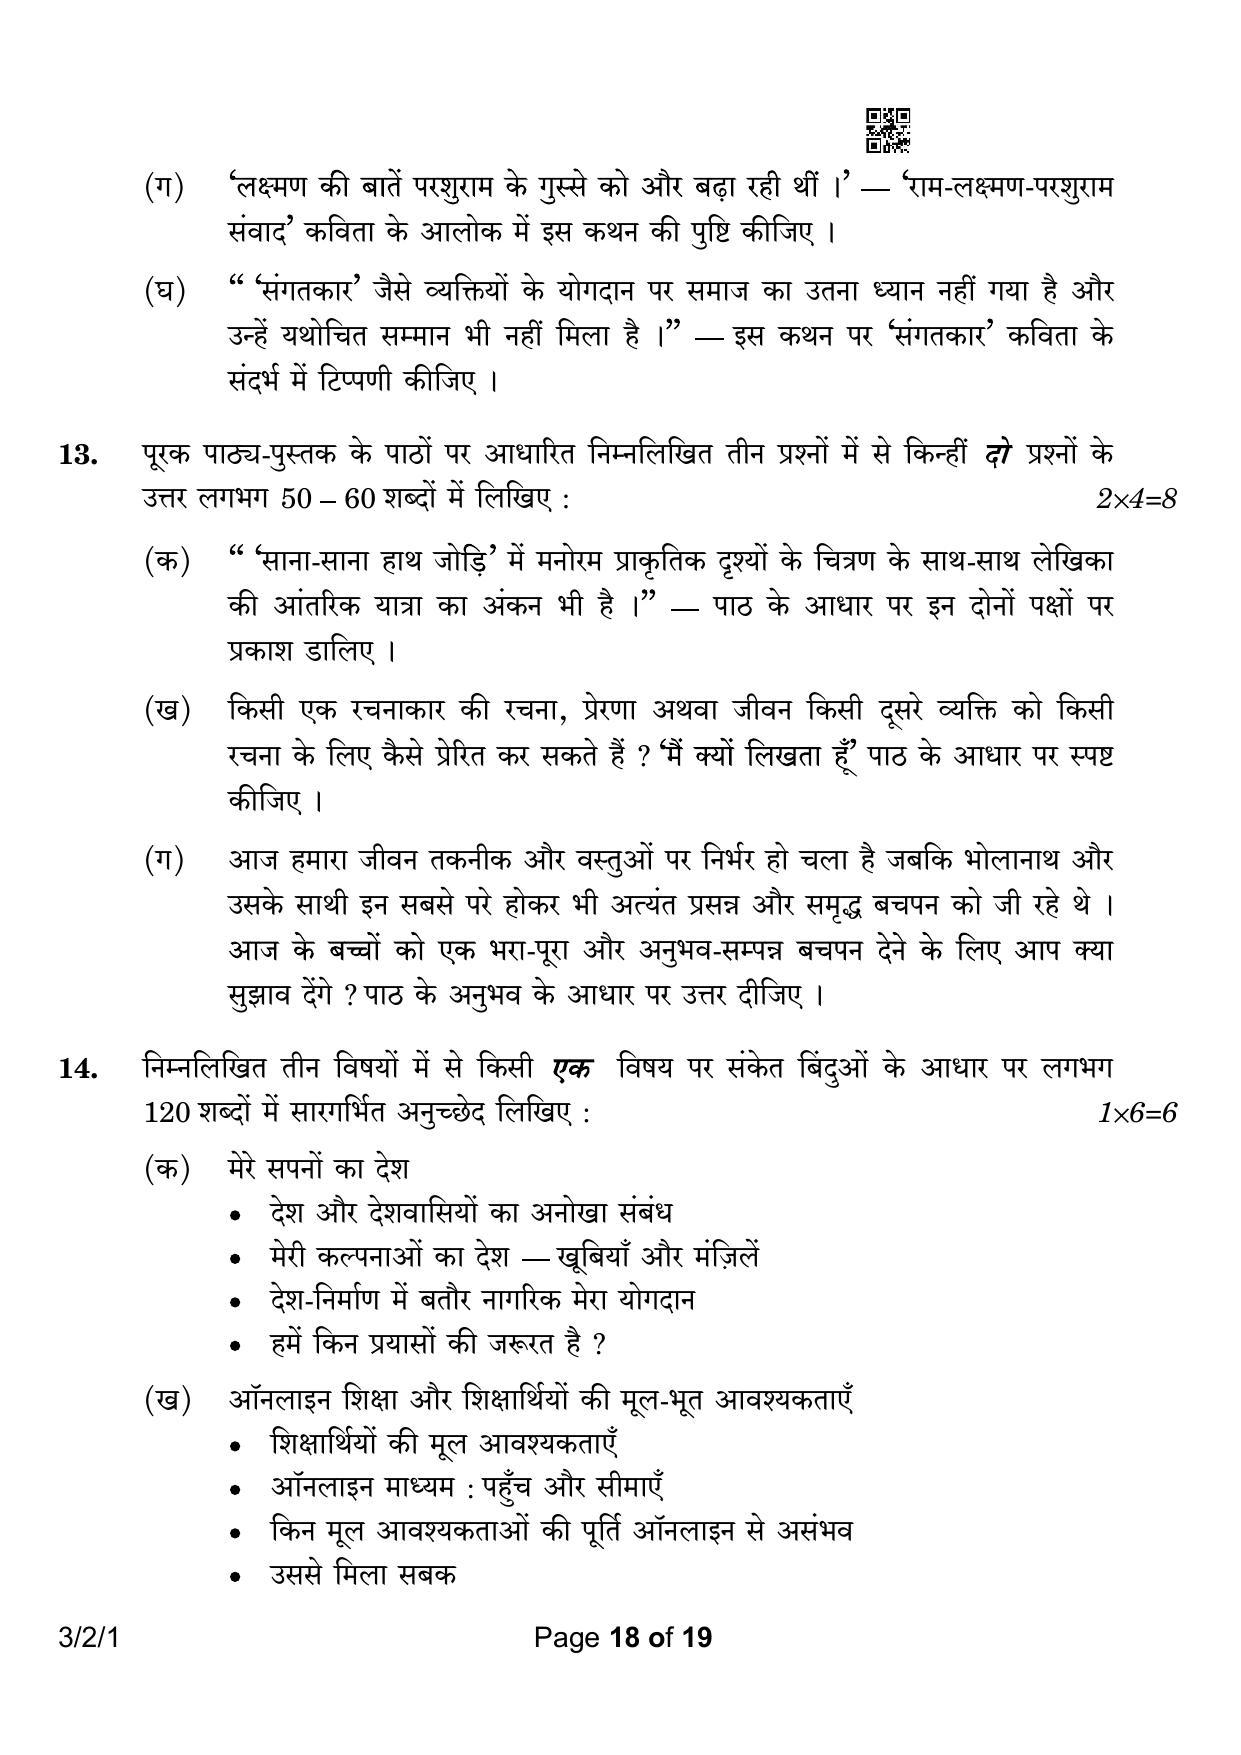 CBSE Class 10 3-2-1 Hindi A 2023 Question Paper - Page 18